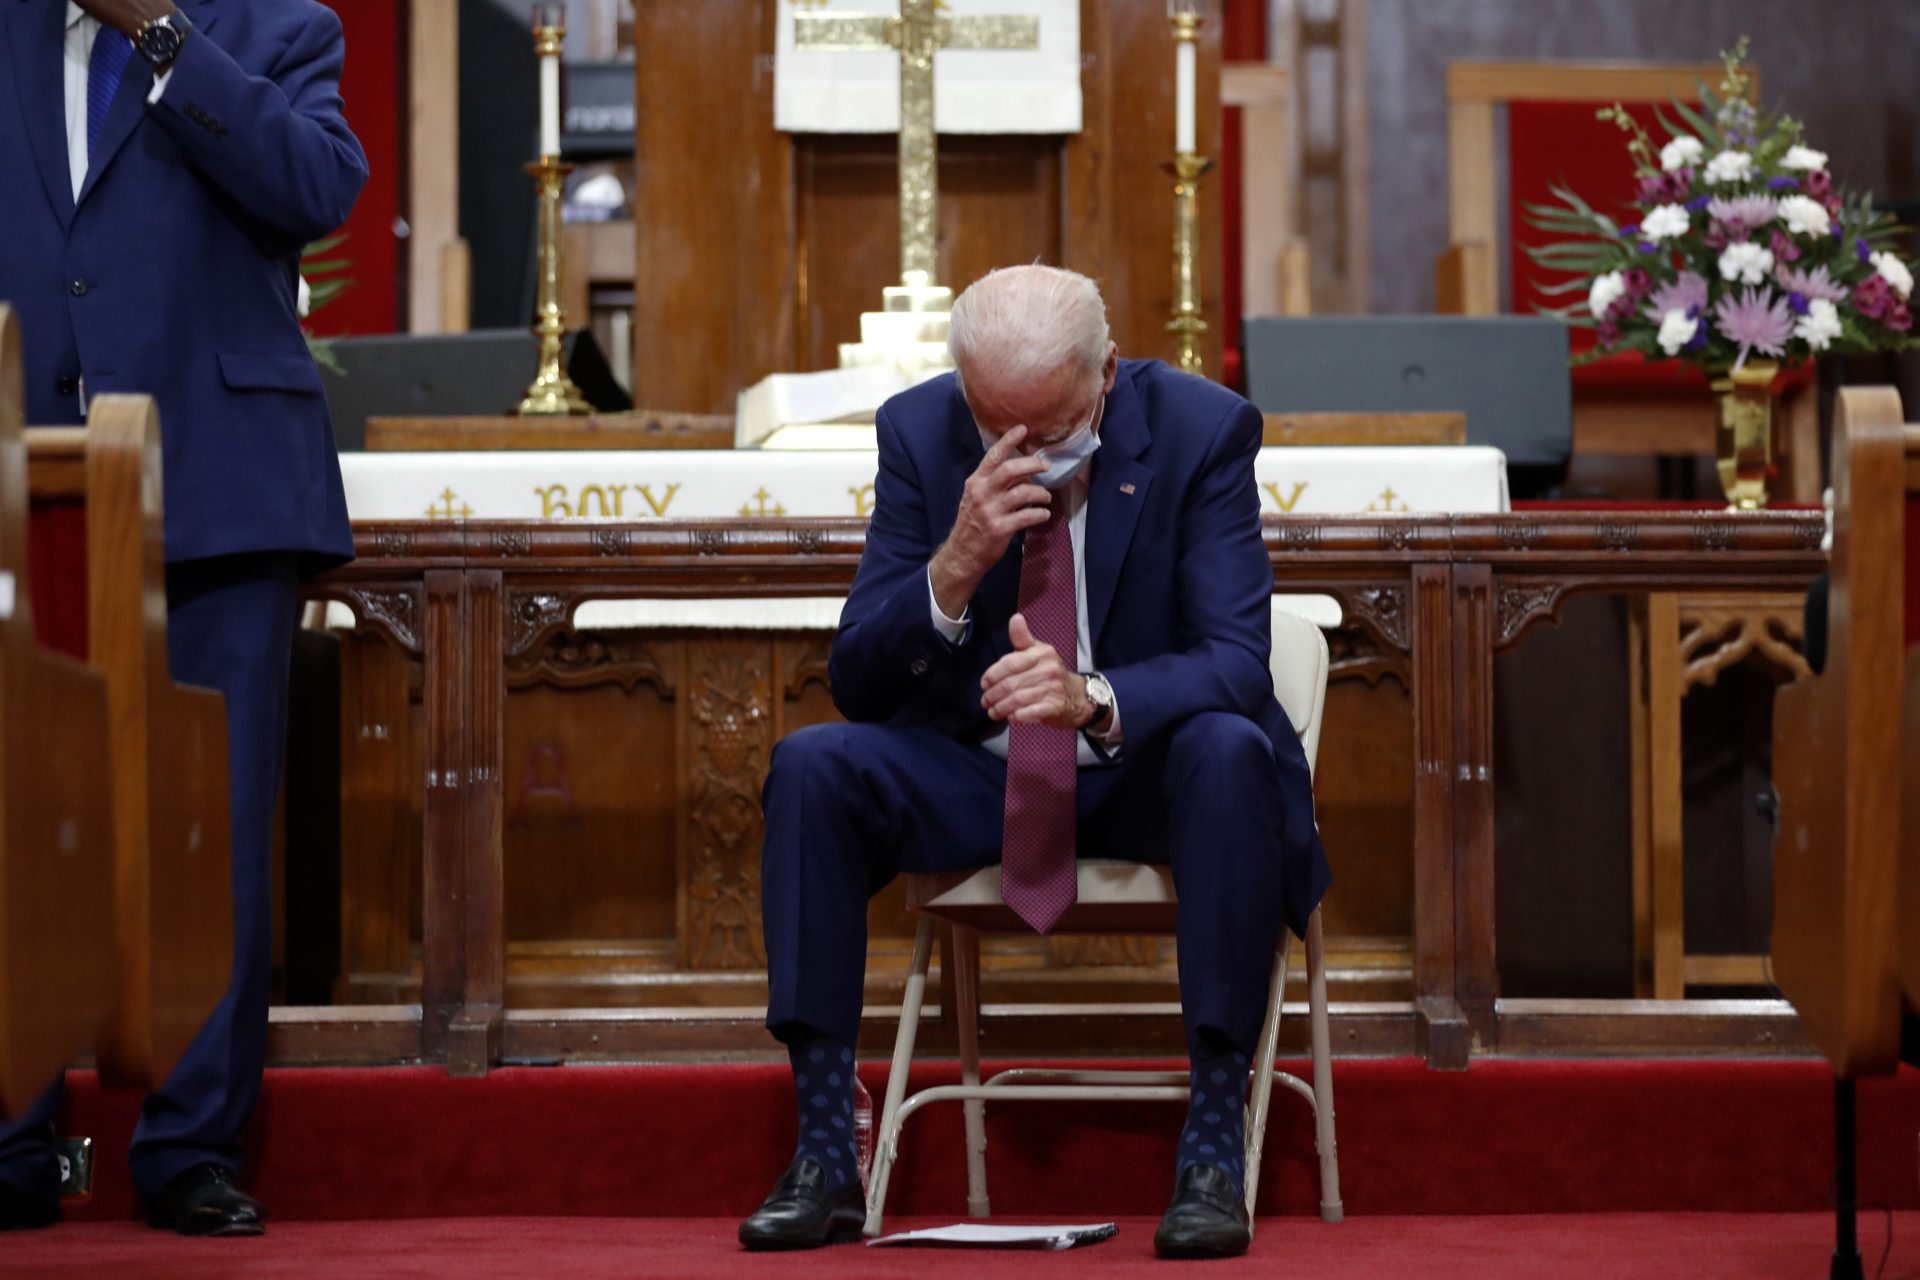 Democratic presidential candidate, former Vice President Joe Biden bows his head and prays as he visits Bethel AME Church in Wilmington, Del., Monday, June 1, 2020